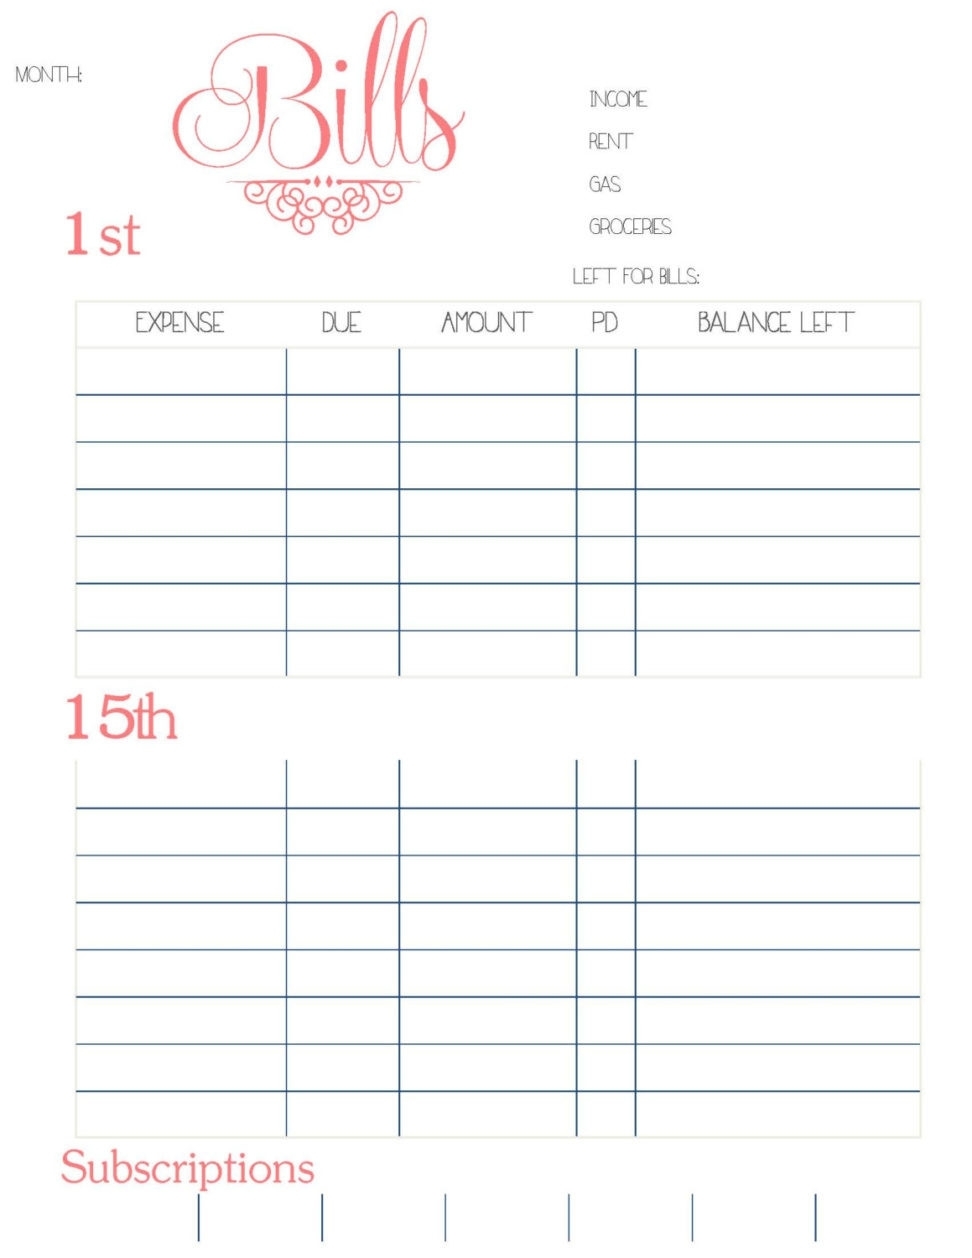 Monthly Bill Organizer Template Excel – Excels Download pertaining to Free Bill Organizer Printable Sheets